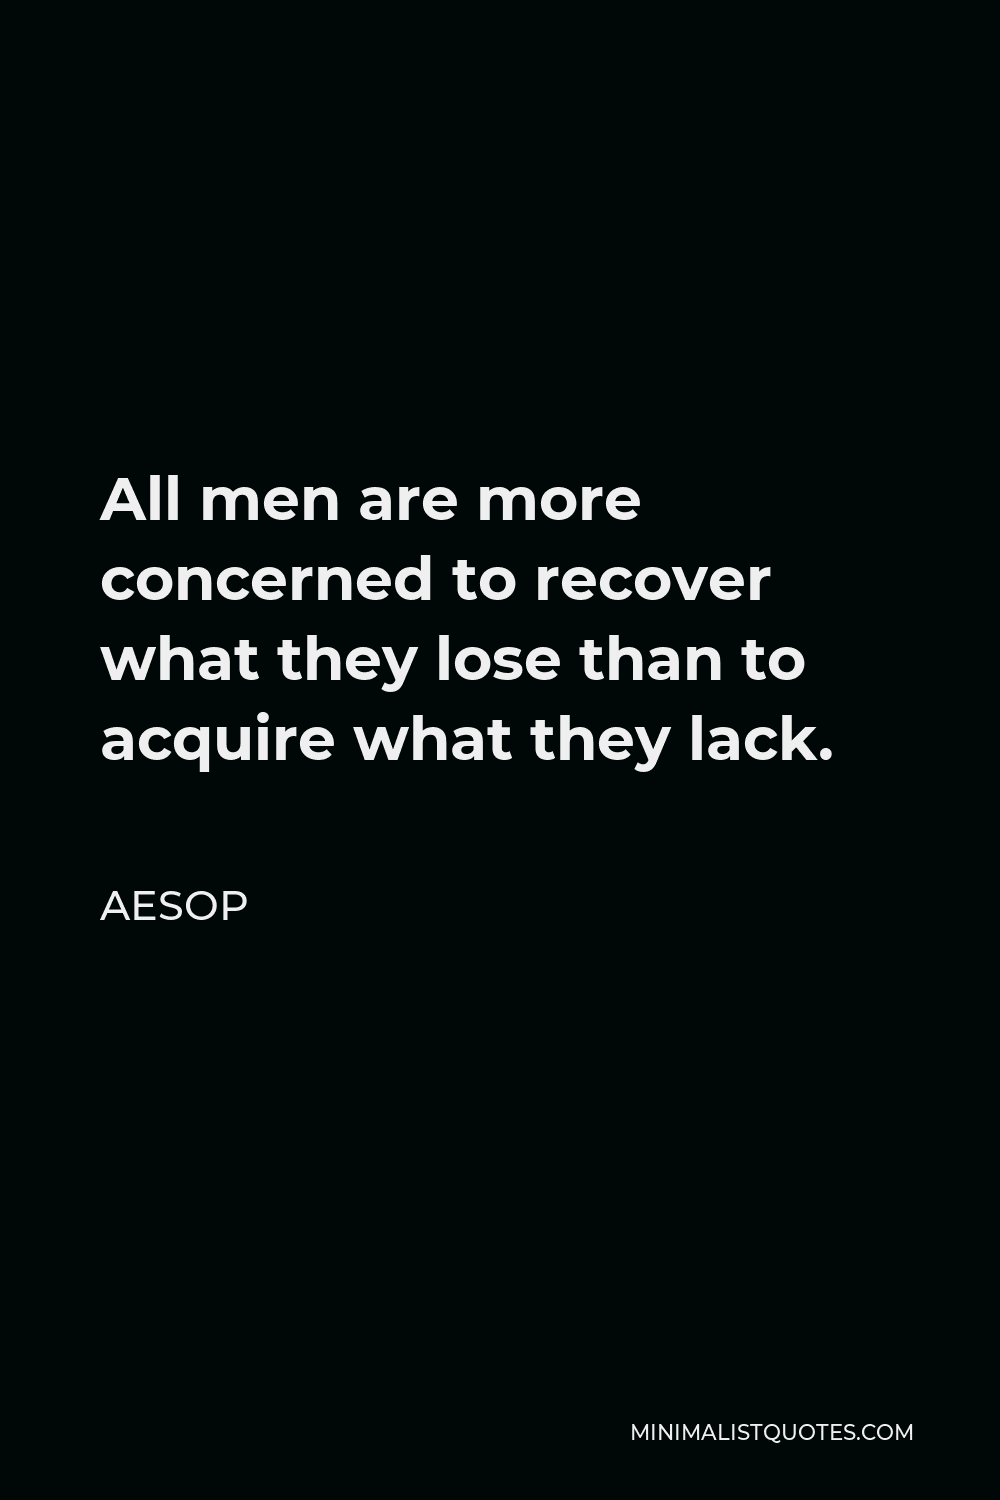 Aesop Quote - All men are more concerned to recover what they lose than to acquire what they lack.